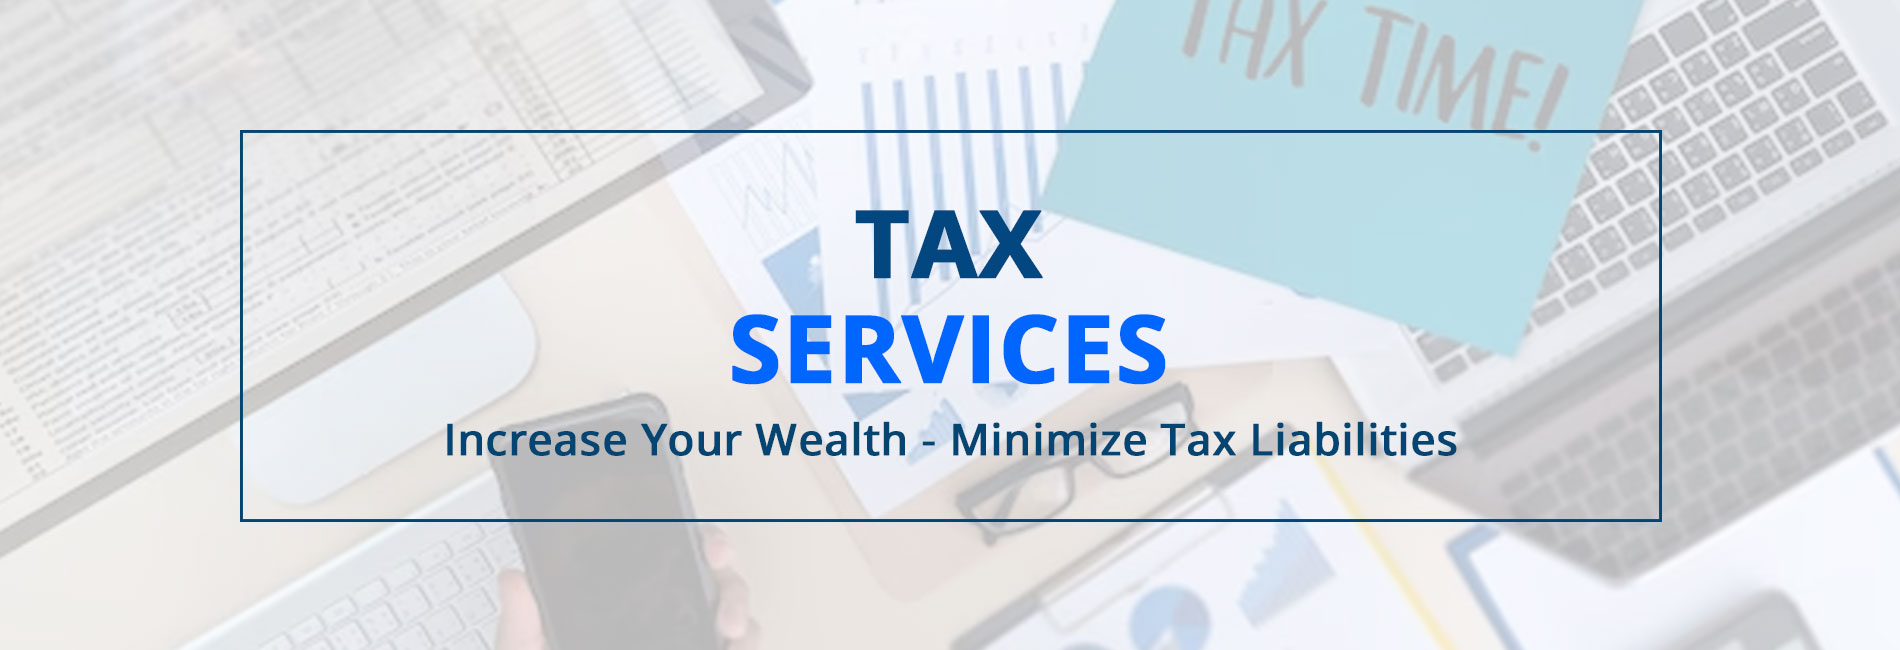 tax services 4